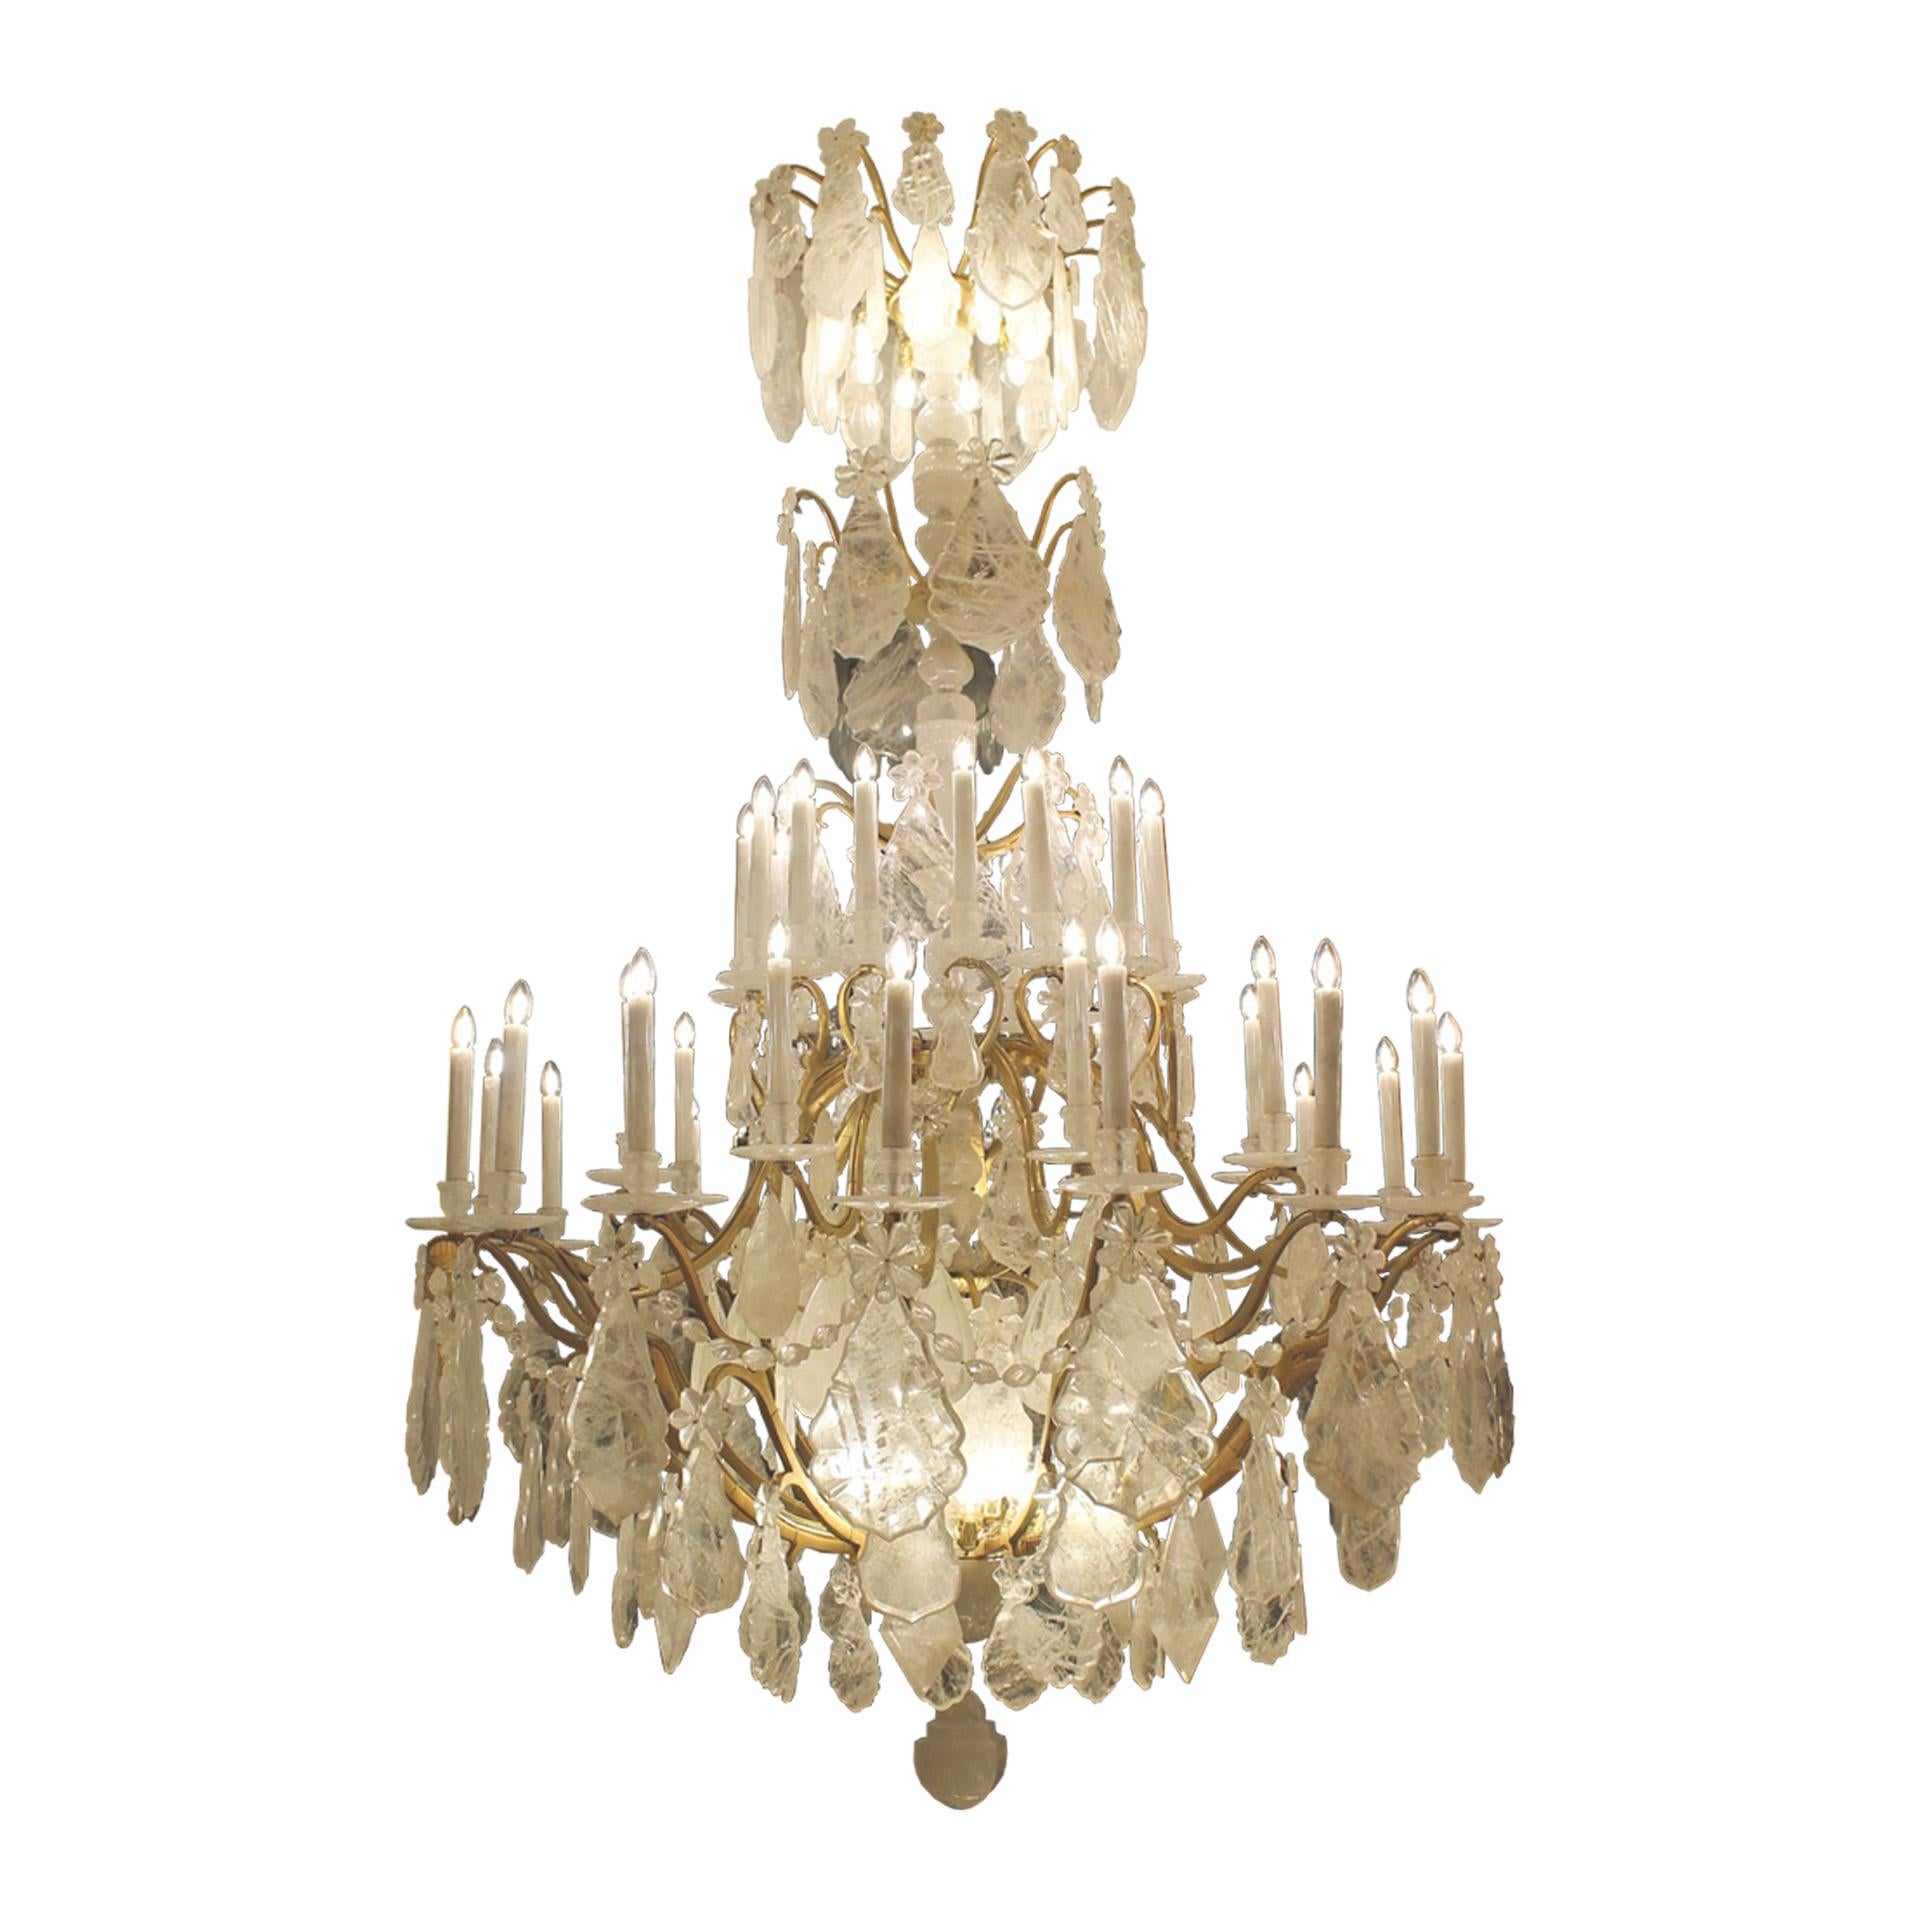 Pair of grand rock crystal chandeliers in the Louis XV style. Original circa 1910 Gilt bronze frame with 64 lights, with an antique finish, redressed in rock crystal by Dimitri Stefanov. Dimensions : Height 300 cm x 180 cm diameter.  

All redressed